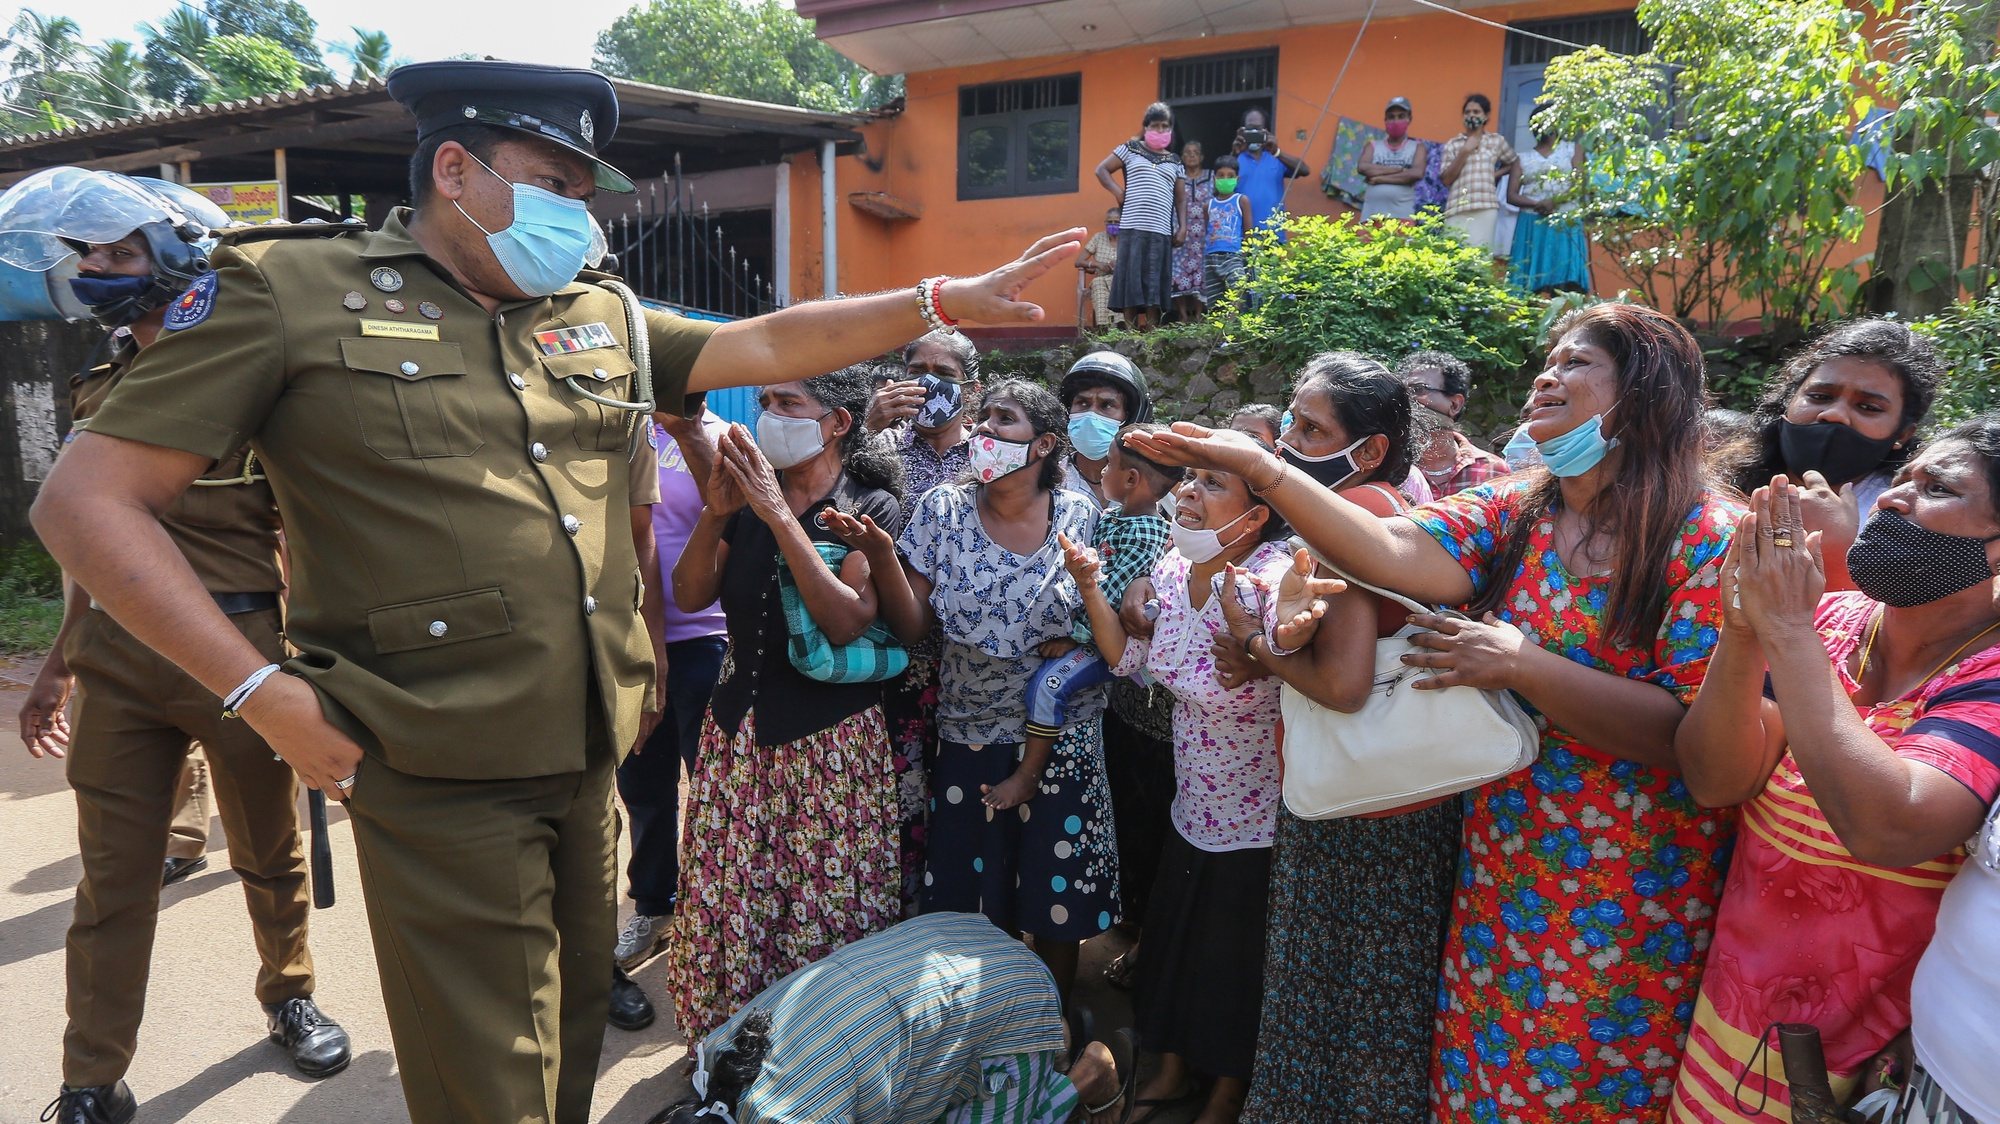 epaselect epa08852418 Relatives of prison inmates plead to authorities to save their kin in the Mahara Prison Complex in the suburbs of Colombo, Sri Lanka, 30 November 2020. A riot by inmates broke out on 29 November at the sprawling at the Mahara maximum security prison, one of the largest prisons in Sri Lanka. By the morning of 30 November, prison authorities confirmed that eight inmates were killed when prison and police officials opened fire at rioters while over 40 others were injured and admitted to the hospital. Presently, according to theÂ Commissioner-General of Prisons, the fire that broke out in some of the buildings has been extinguished and the situation almost brought under control.Â According to local media reports, 183 inmates of Mahara prison tested positive for COVID-19, increasing the number of COVID-19 infections at Sri Lanka&#039;s prisons by 1,091.  EPA/CHAMILA KARUNARATHNE